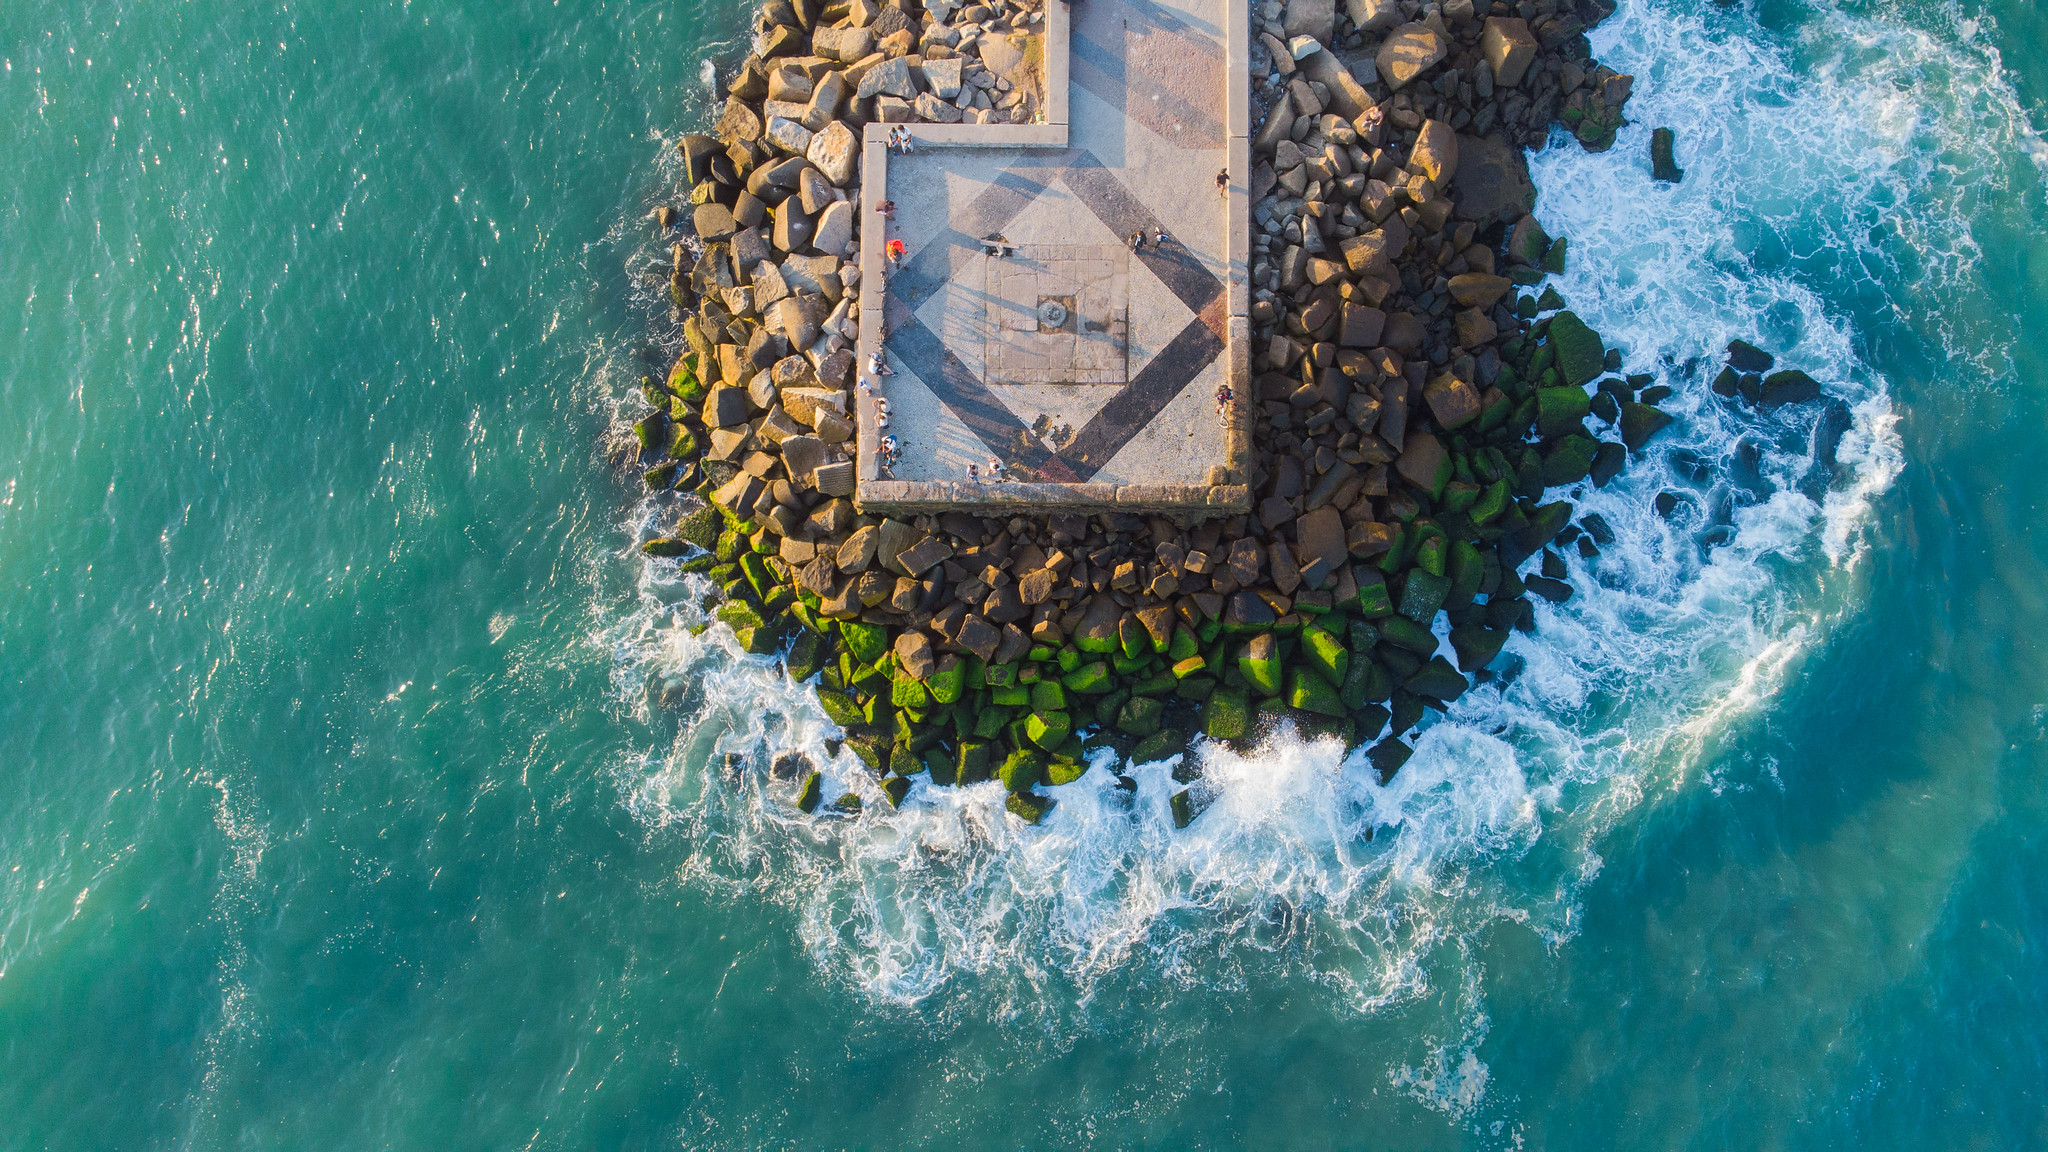 A concrete pier ends in a small square. The pier is built on top of a mound of rocks. It's surrounded by water that is frothing against the rocks. Image: Rafael Catarcione/Riotur